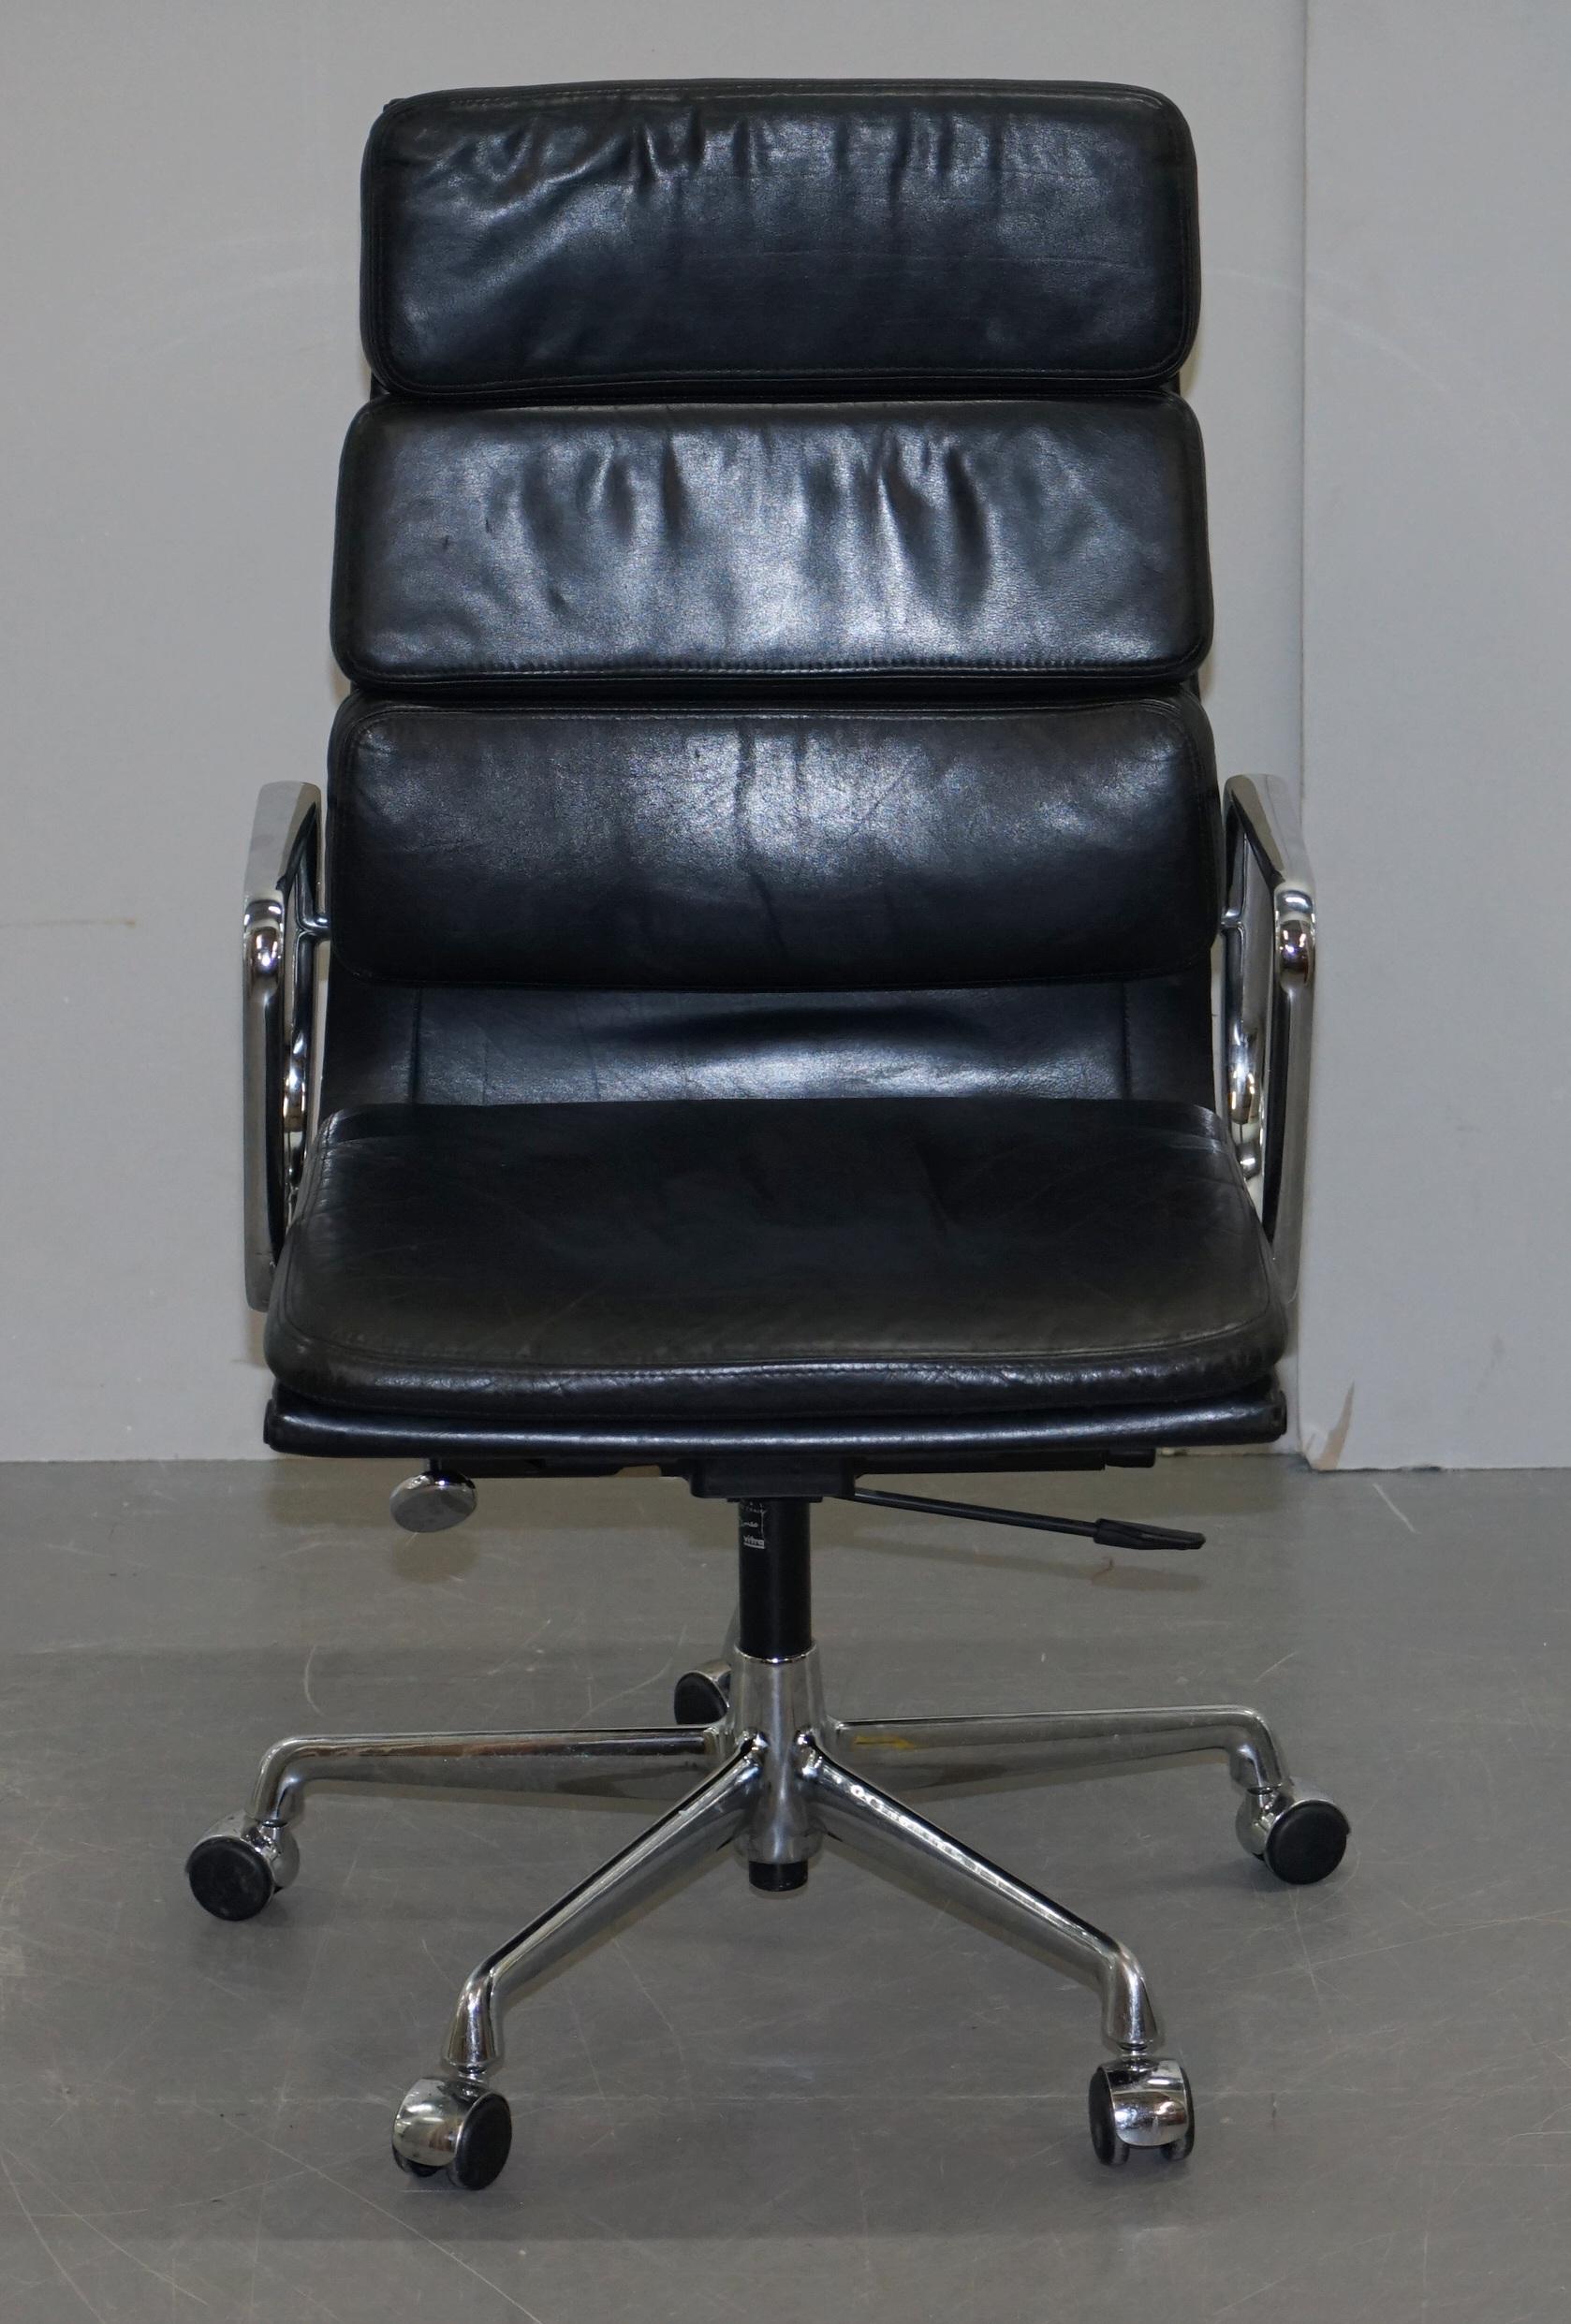 We are delighted to offer for sale this very comfortable Charles Eames retailed through Vitra Italy fully stamped RRP £3620 high back soft pad office chair with chrome swivel base

Pretty much one of the most iconic chairs ever made, the history,